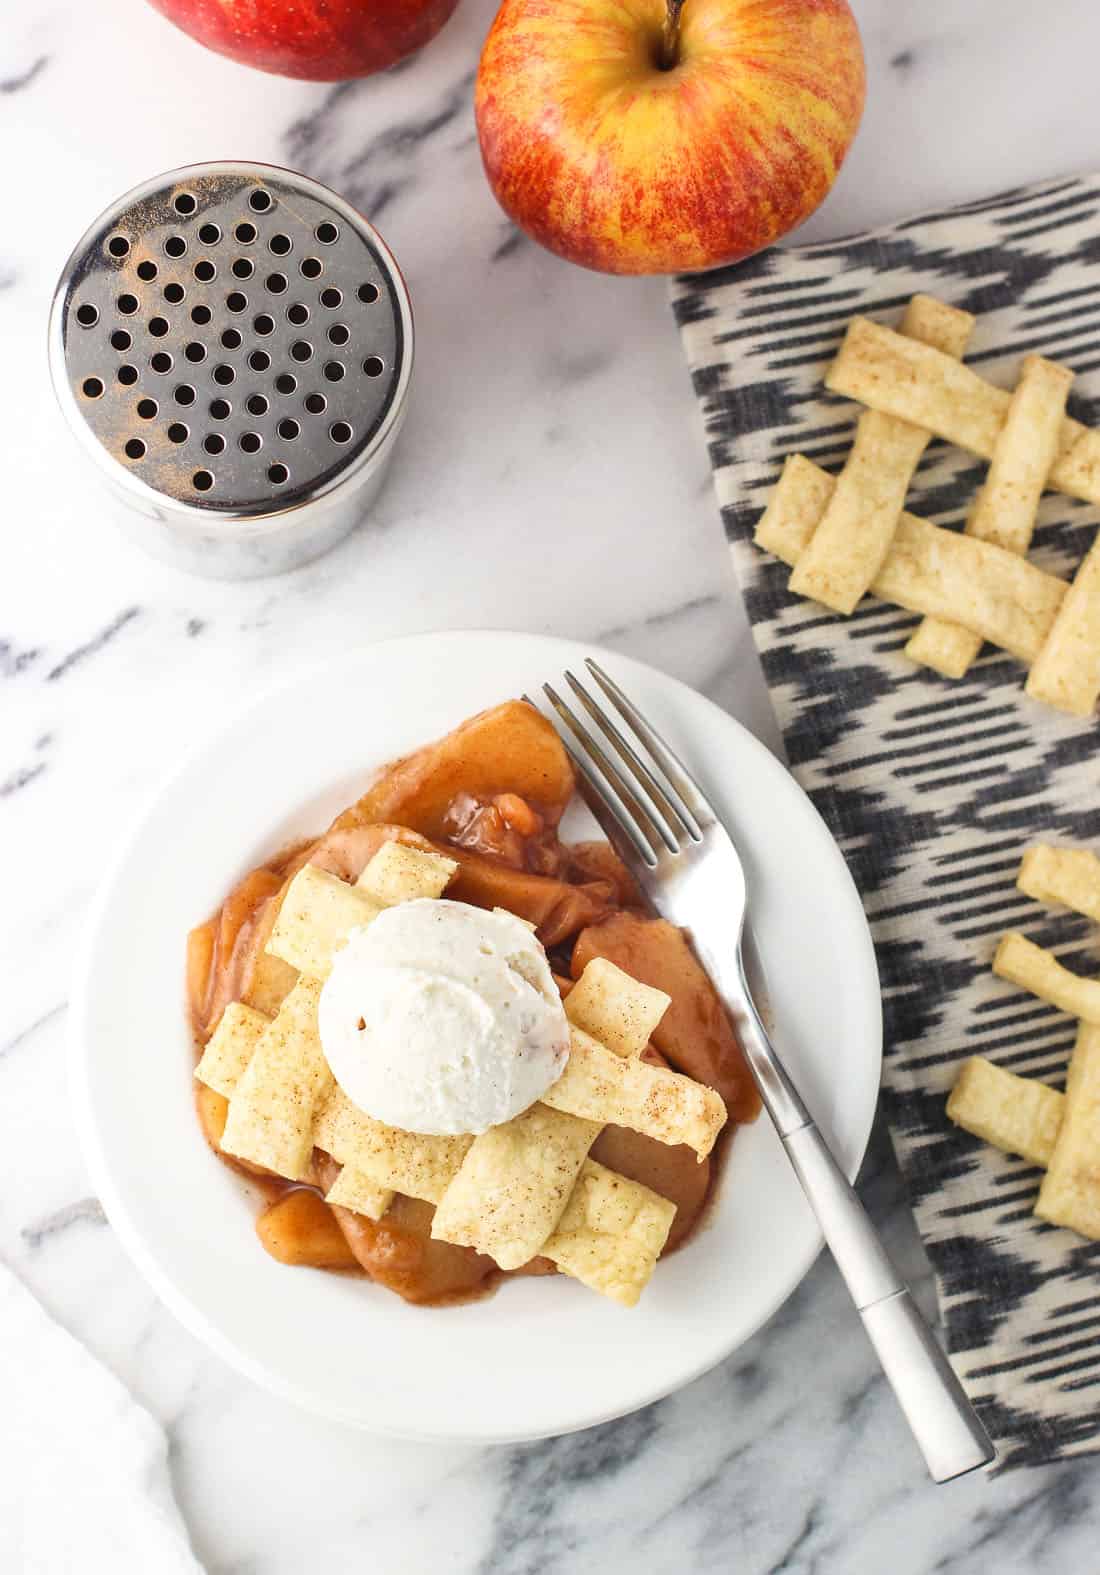 A serving of ice cream-topped slow cooker apple pie on a plate with a fork.